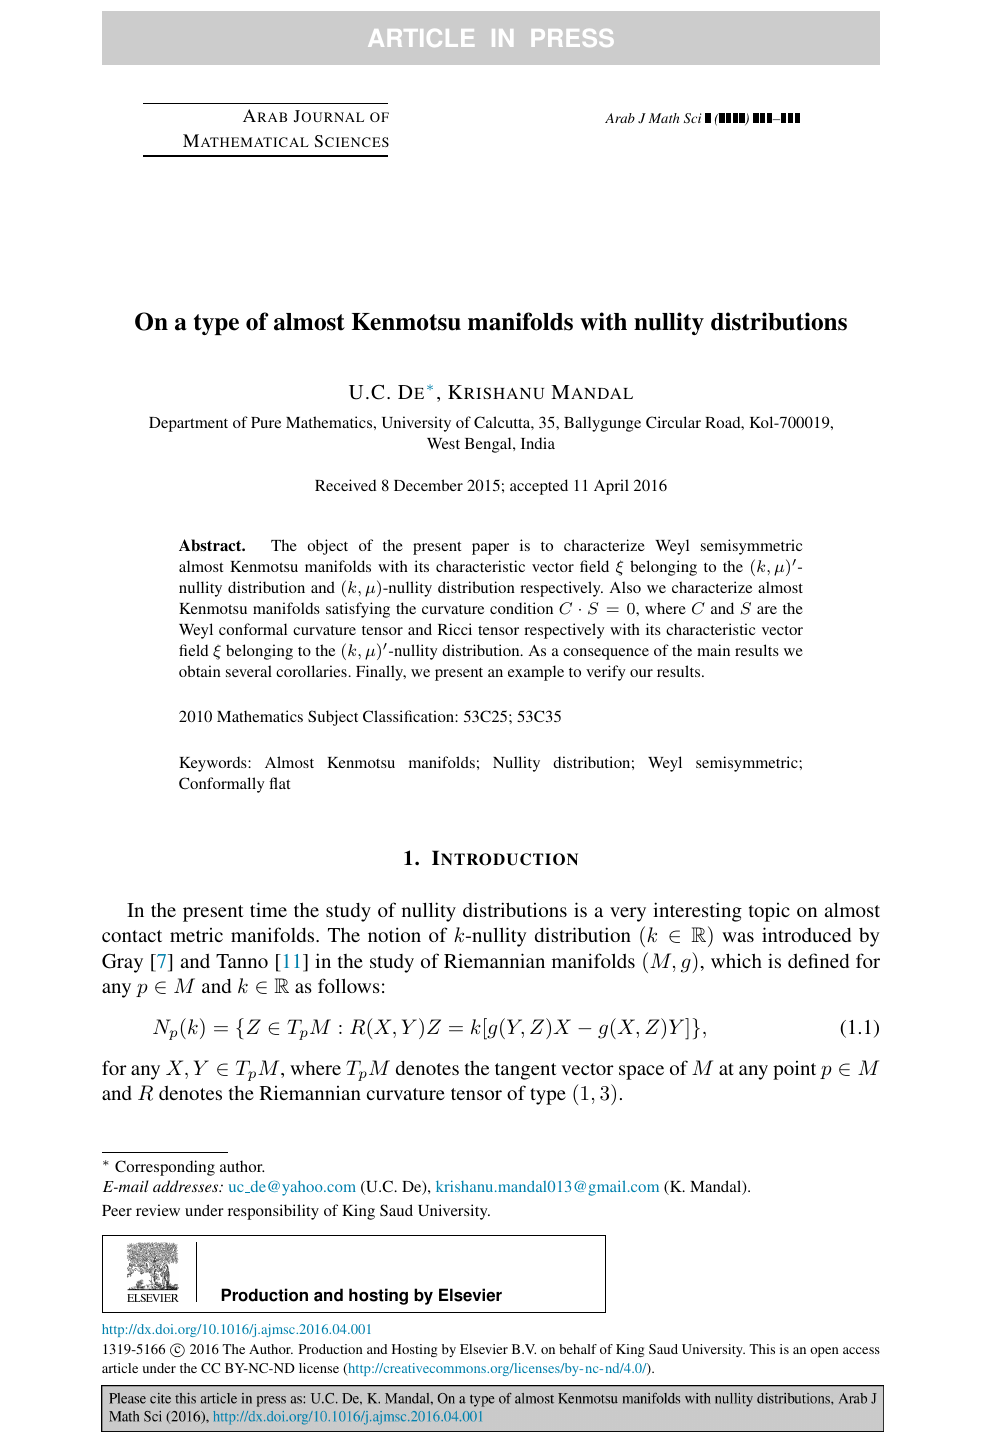 On A Type Of Almost Kenmotsu Manifolds With Nullity Distributions Topic Of Research Paper In Mathematics Download Scholarly Article Pdf And Read For Free On Cyberleninka Open Science Hub